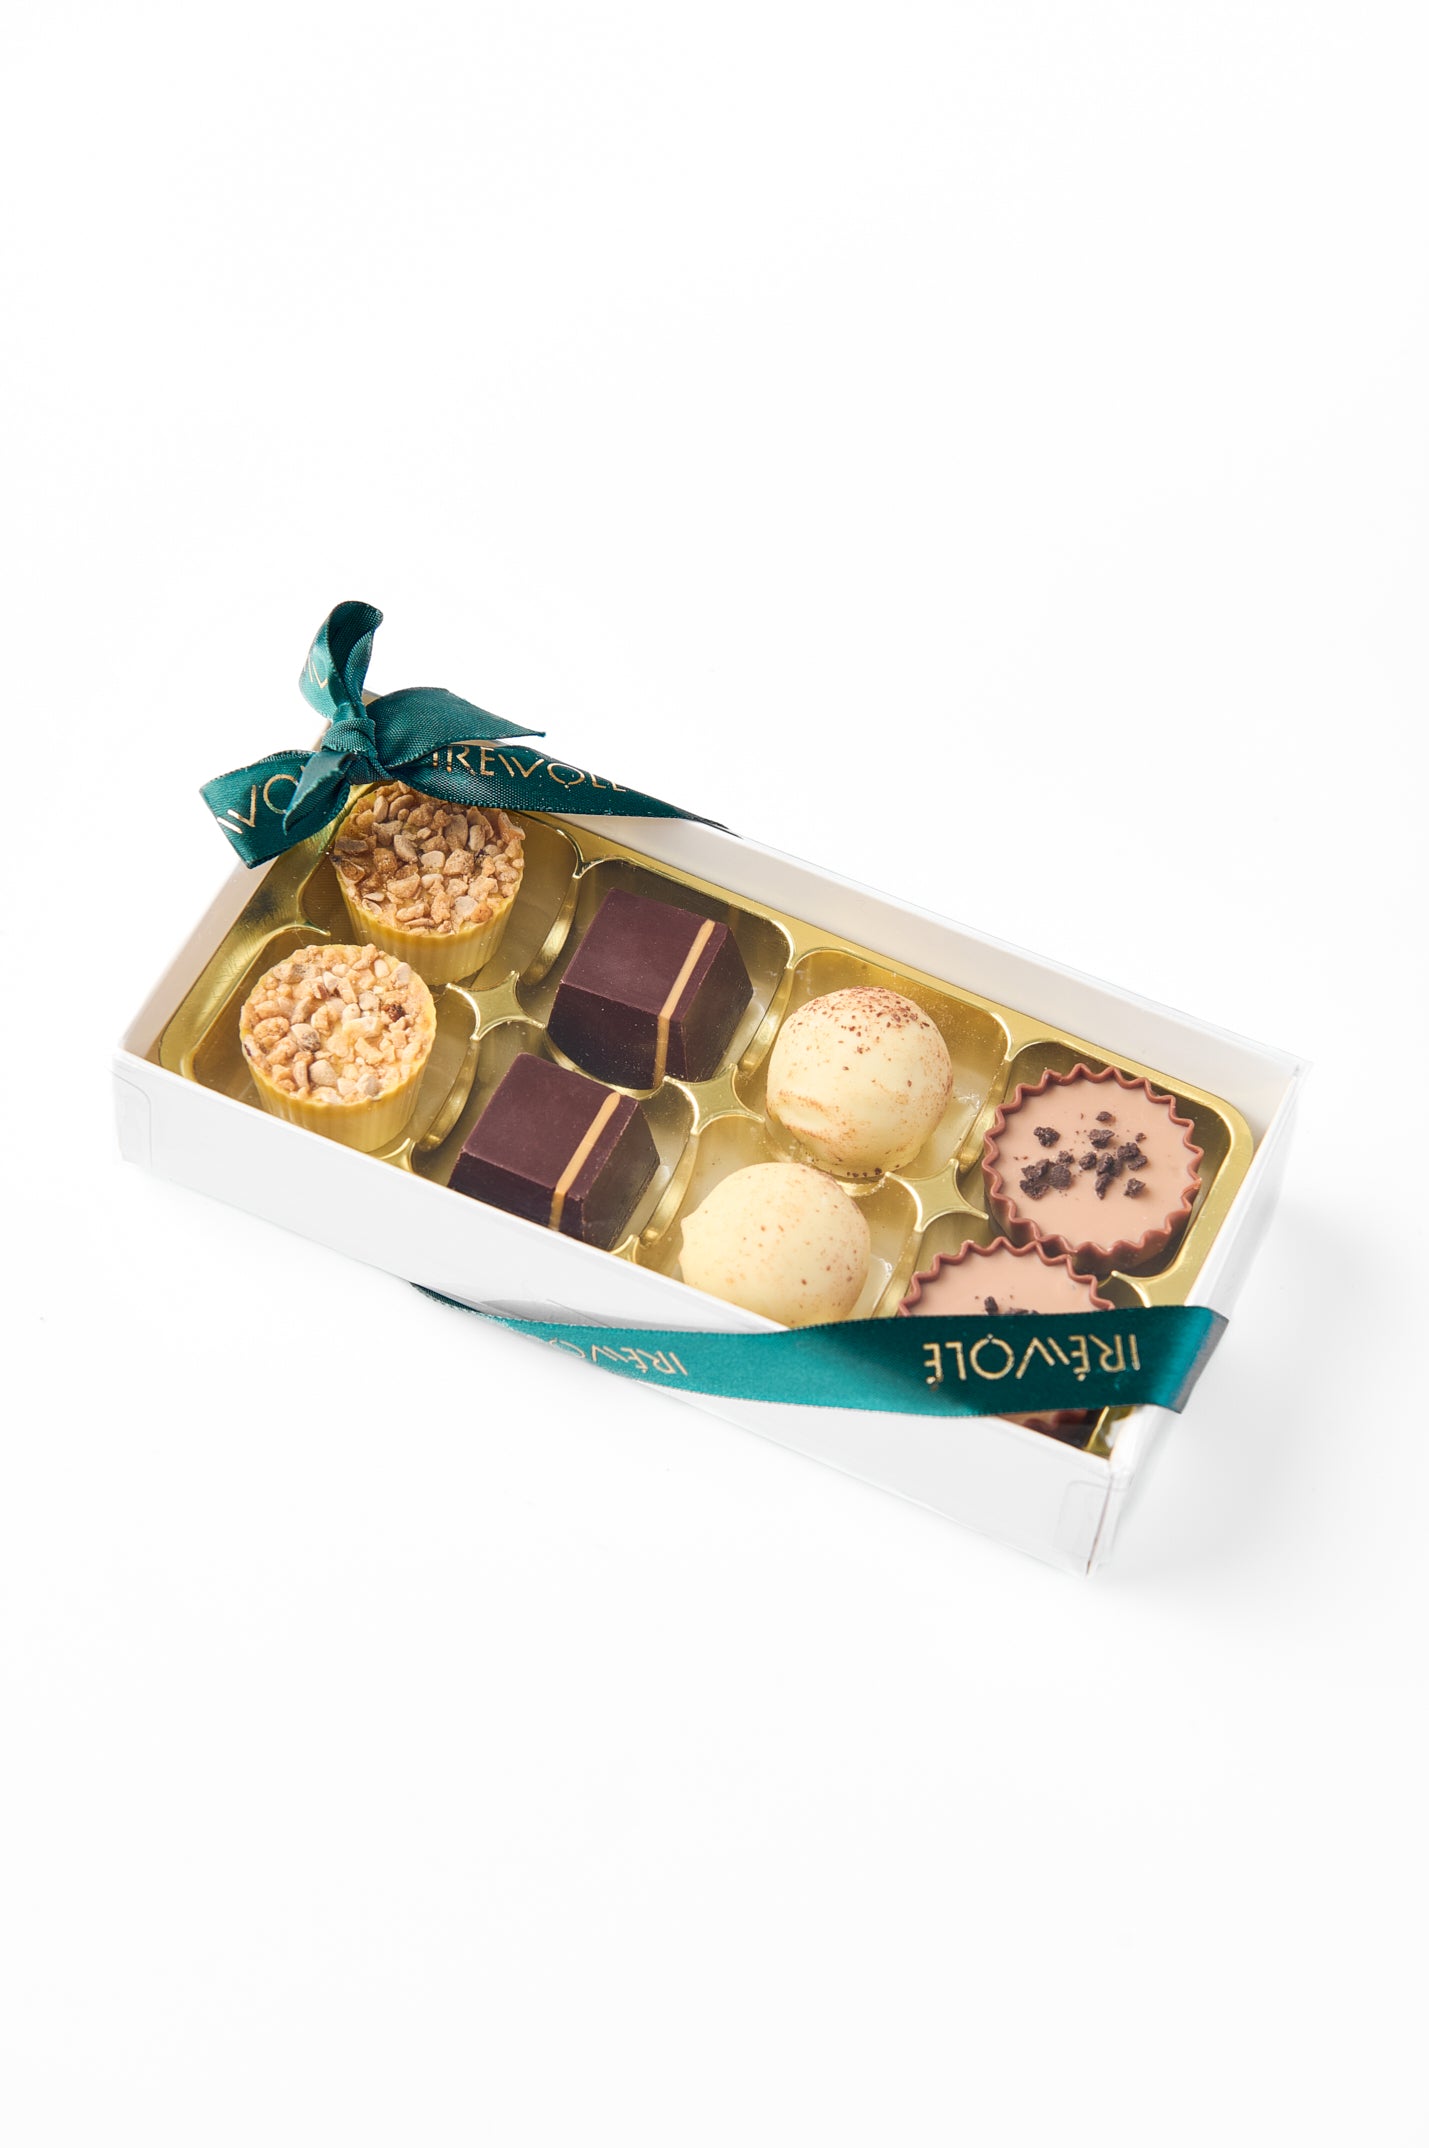 Assorted Chocolates - The Taster Gift Box